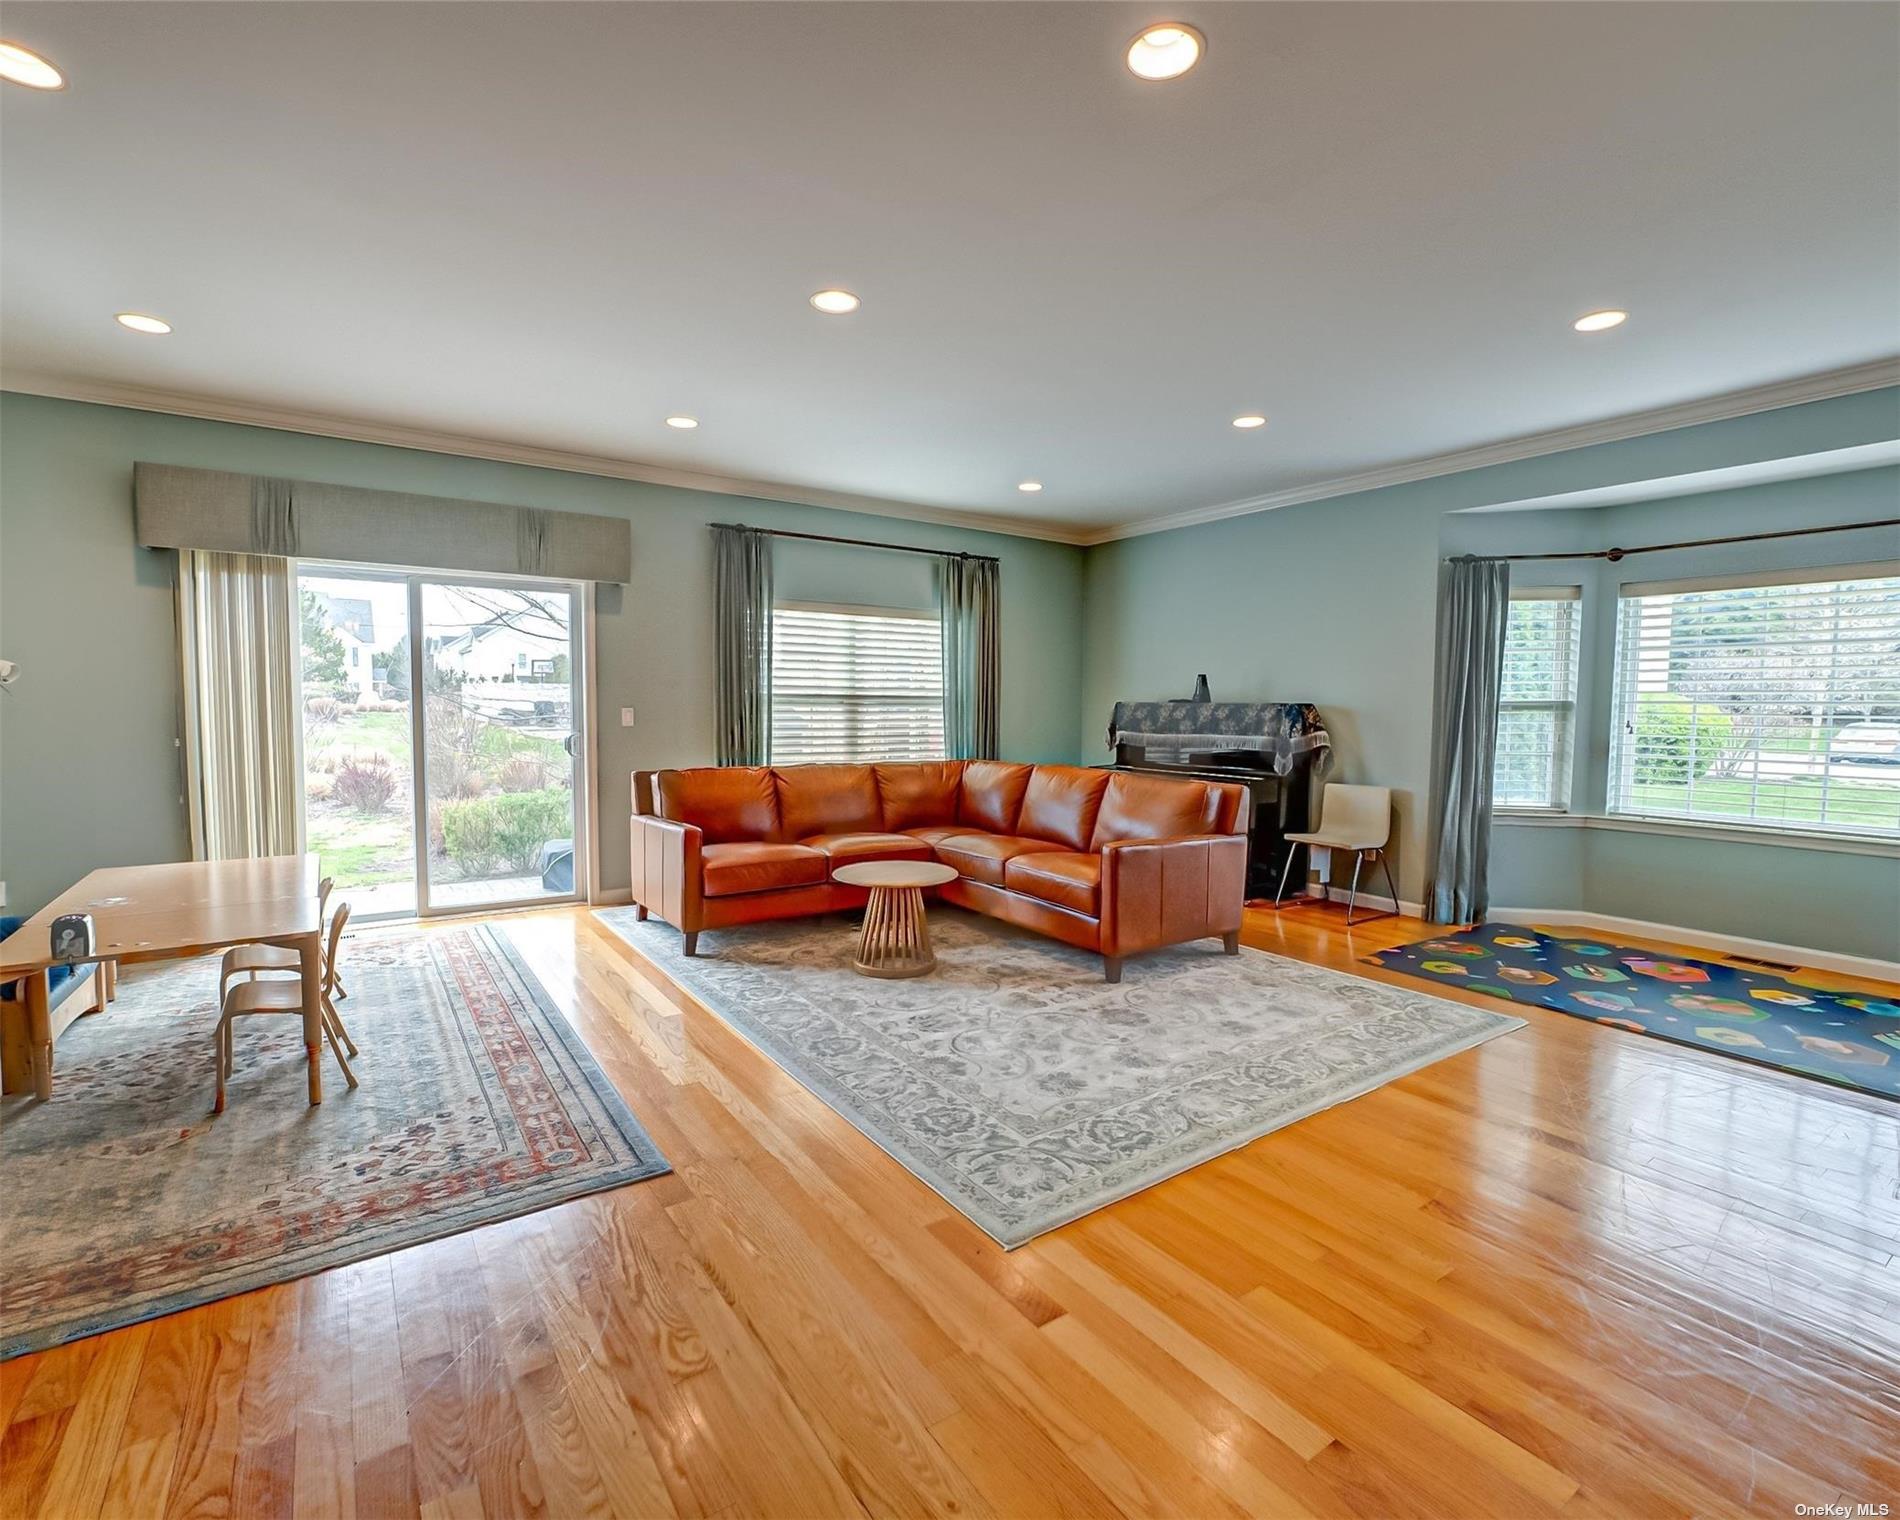 Photo 6 of 14 of 113 Brattle Circle 113 townhome